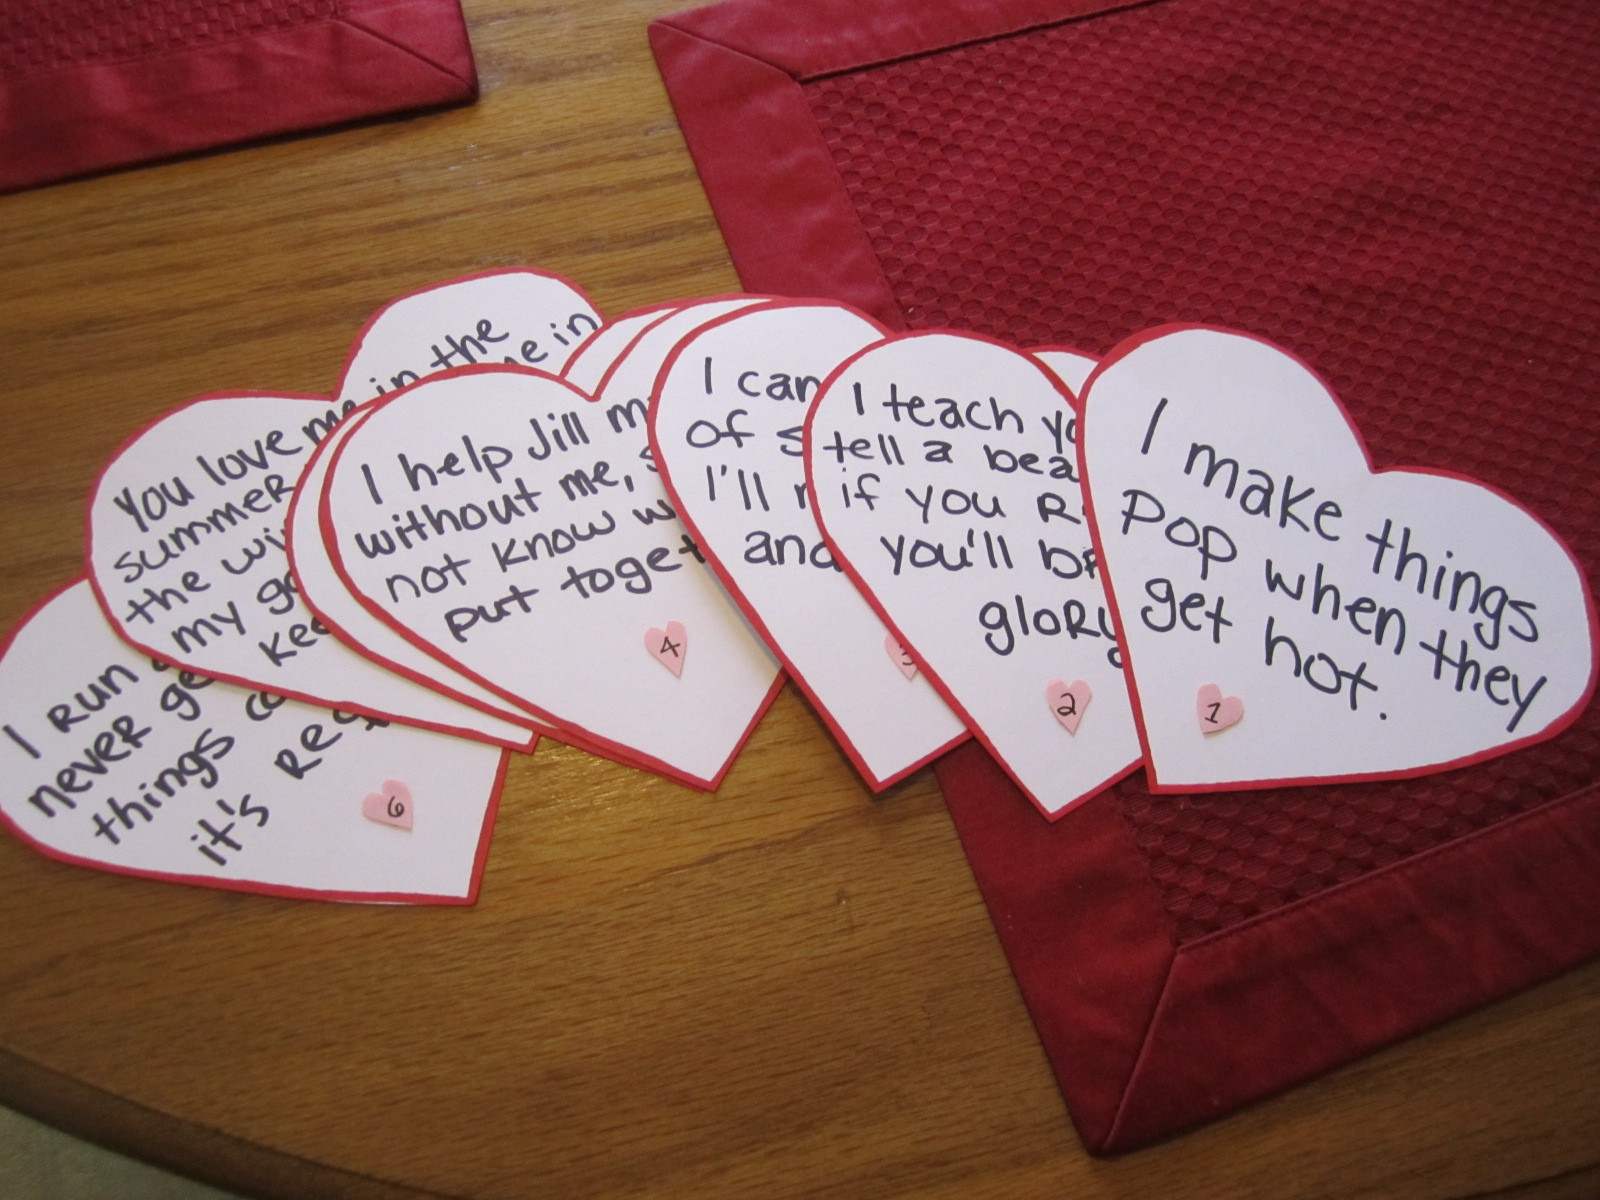 Cute Valentine Gift Ideas For Her
 Ten DIY Valentine’s Day Gifts for him and her